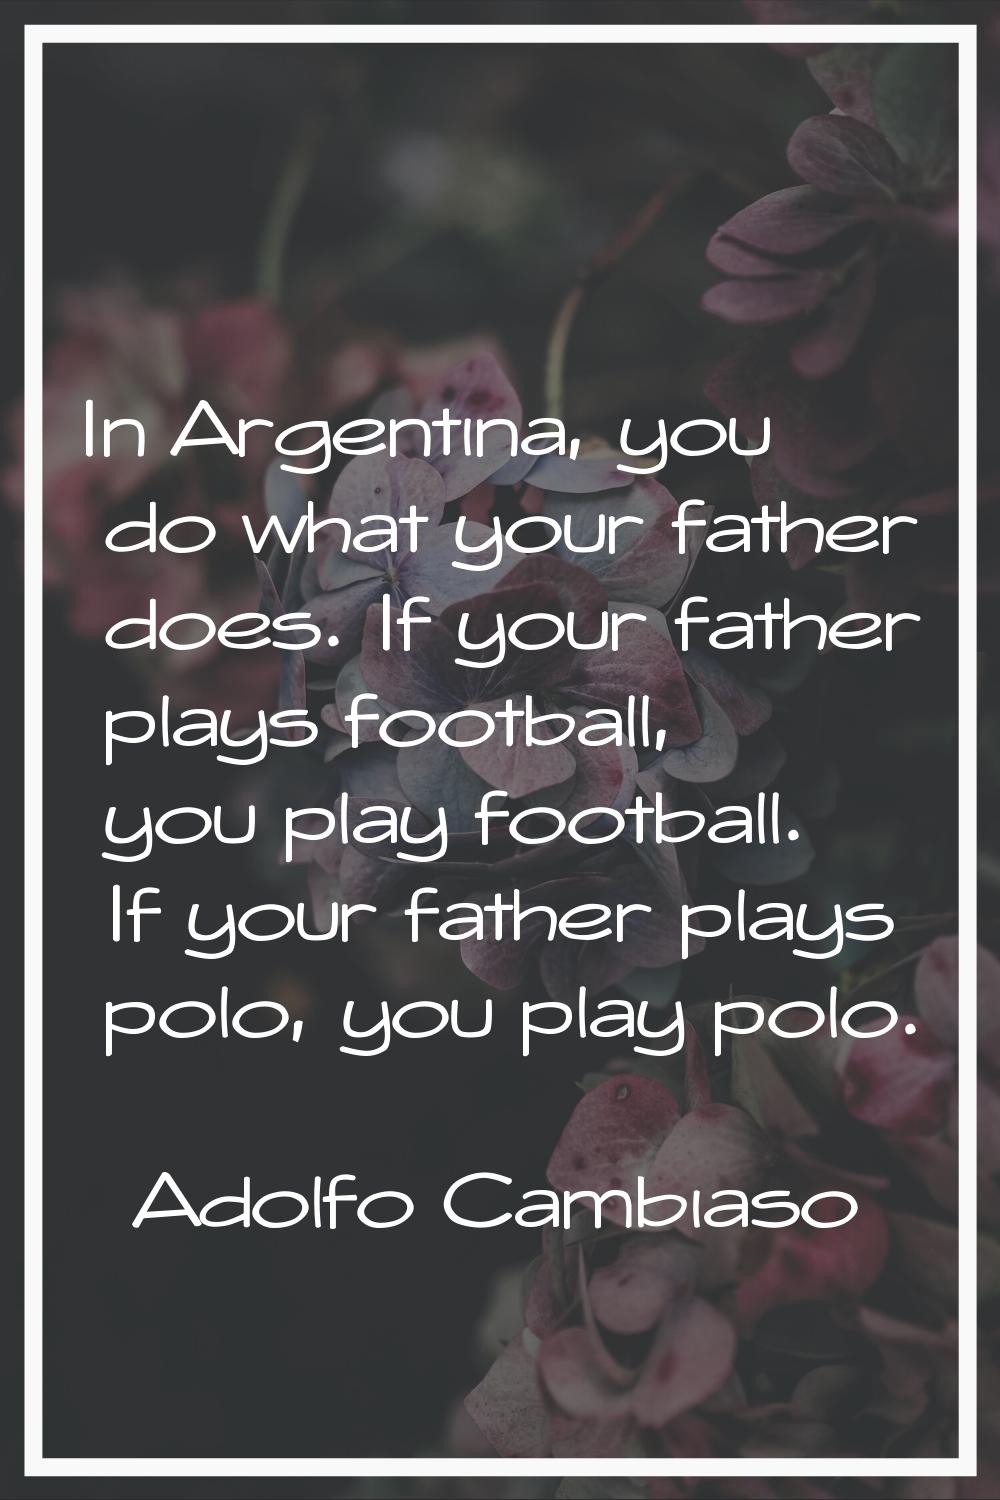 In Argentina, you do what your father does. If your father plays football, you play football. If yo